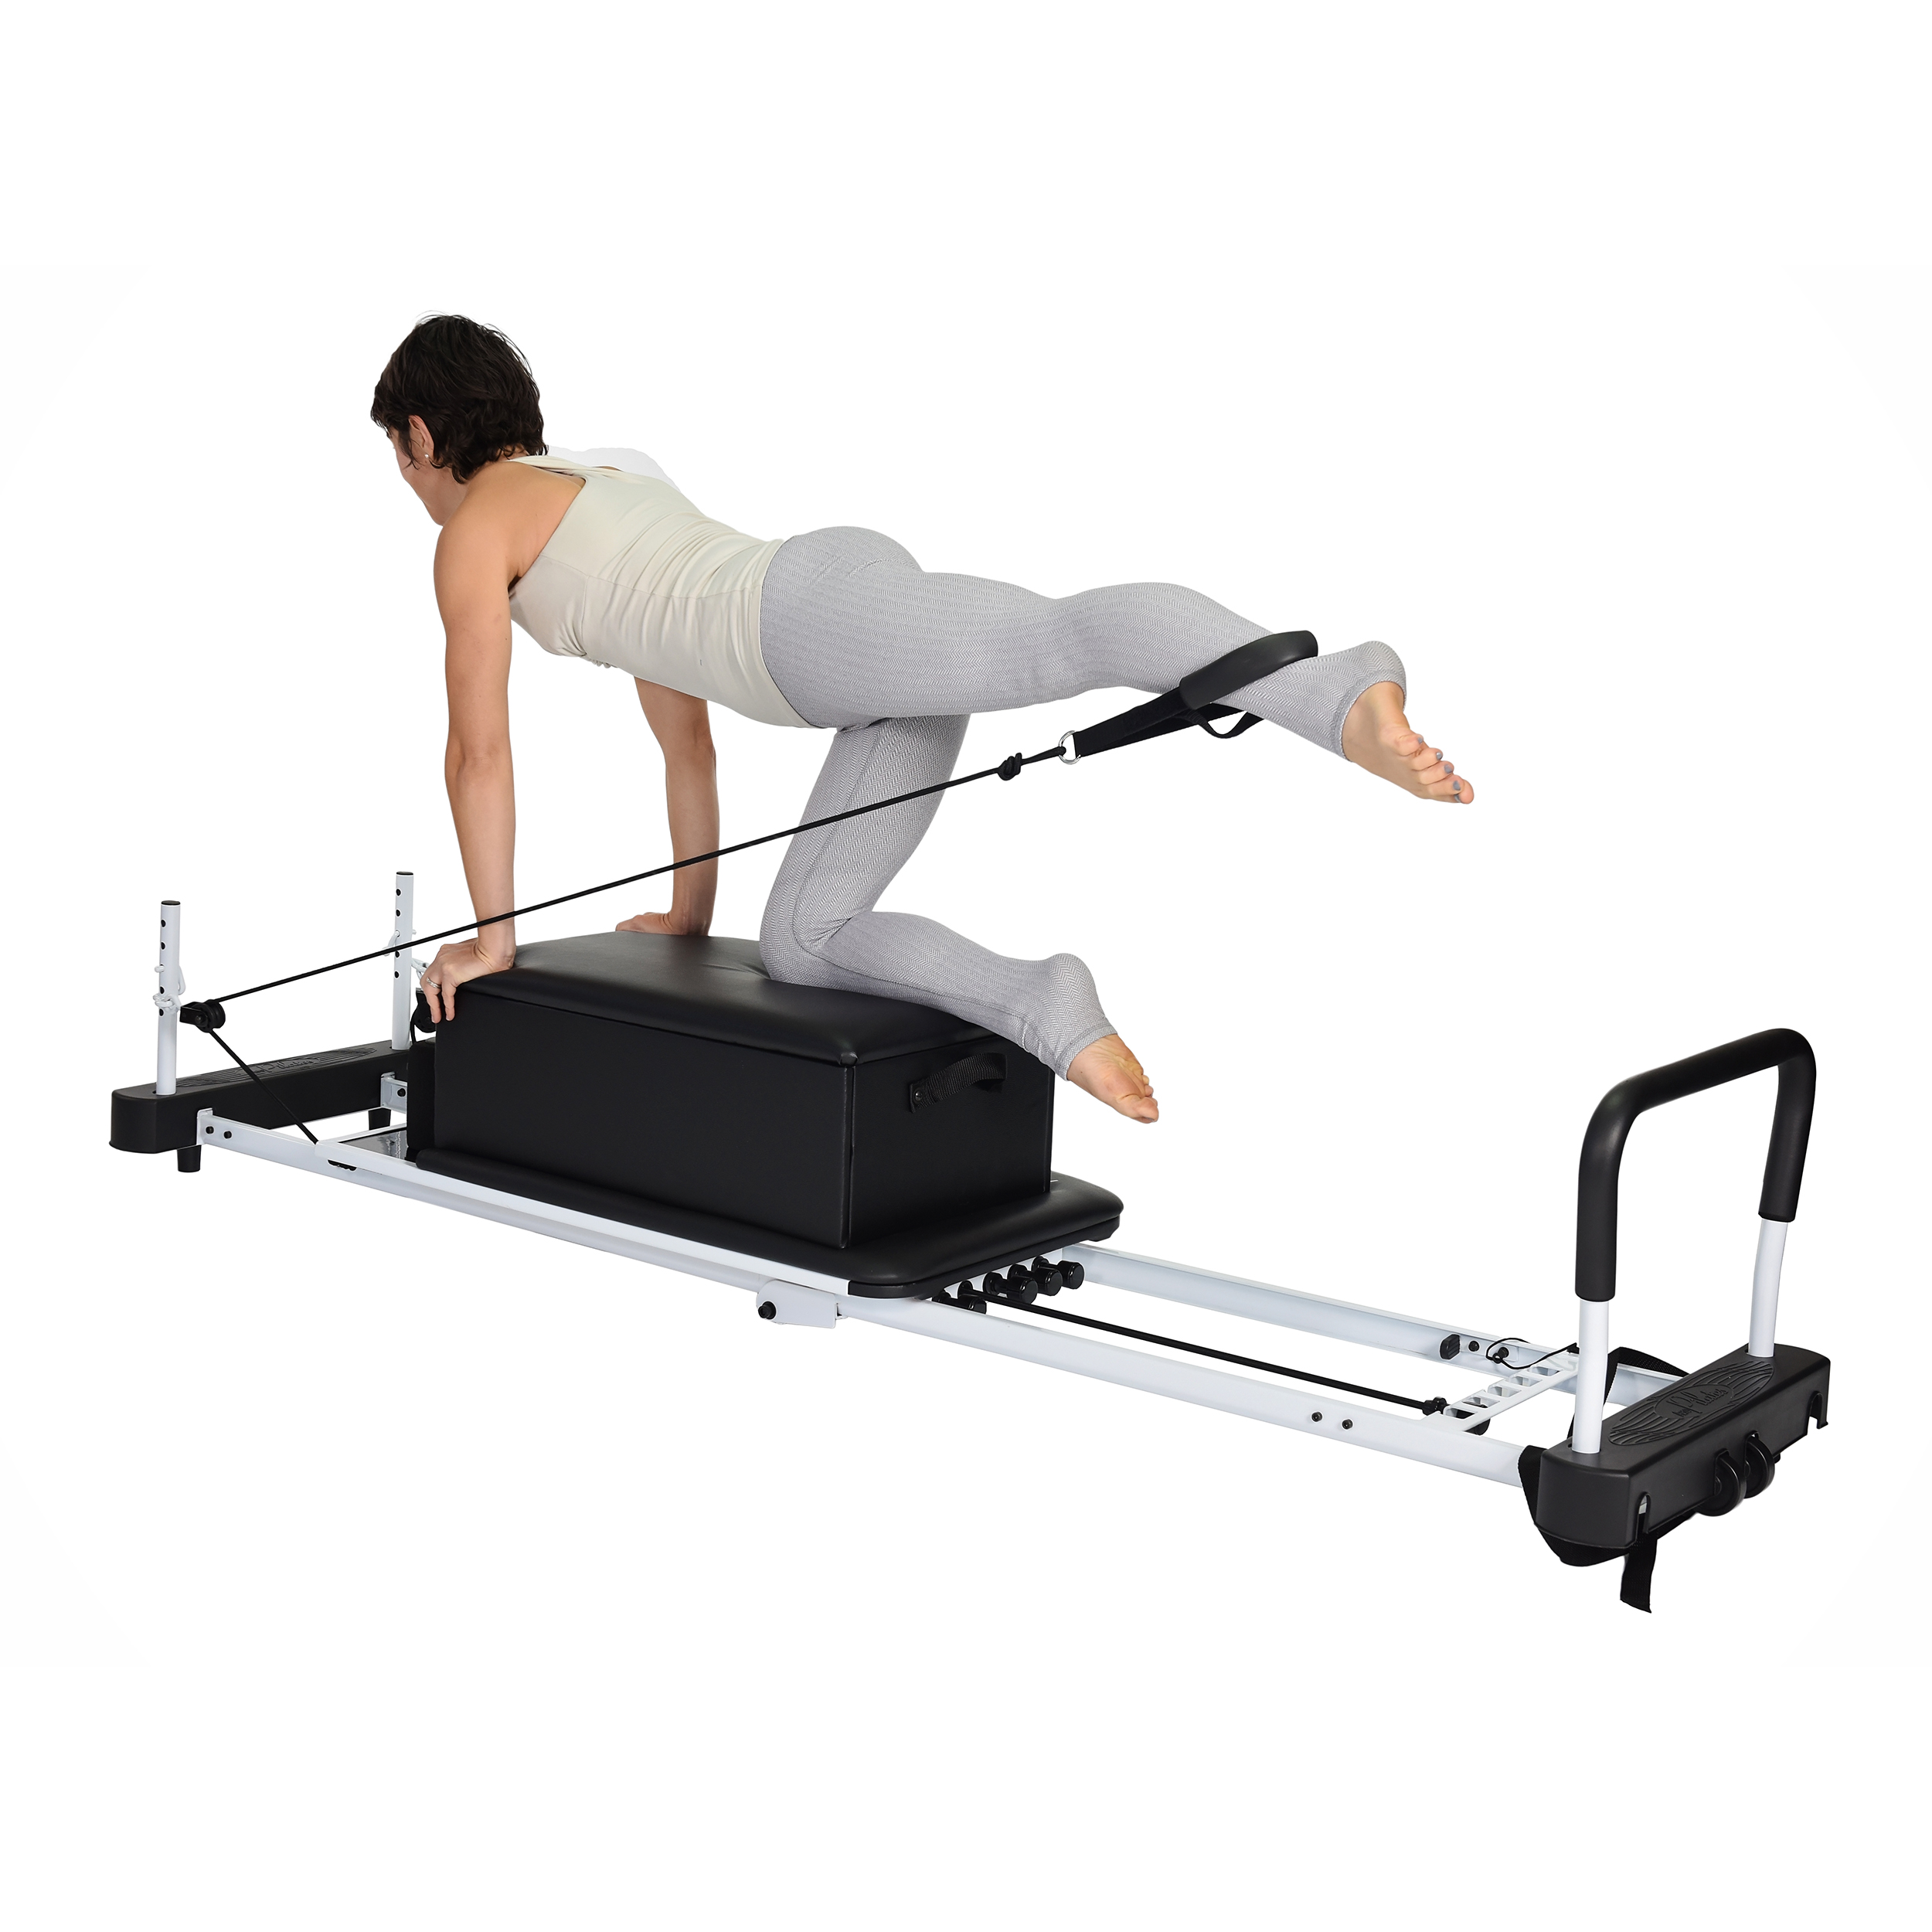 AeroPilates Pilates Exercise BOX and POLE Reformer Accessory + Strap  Workout DVD